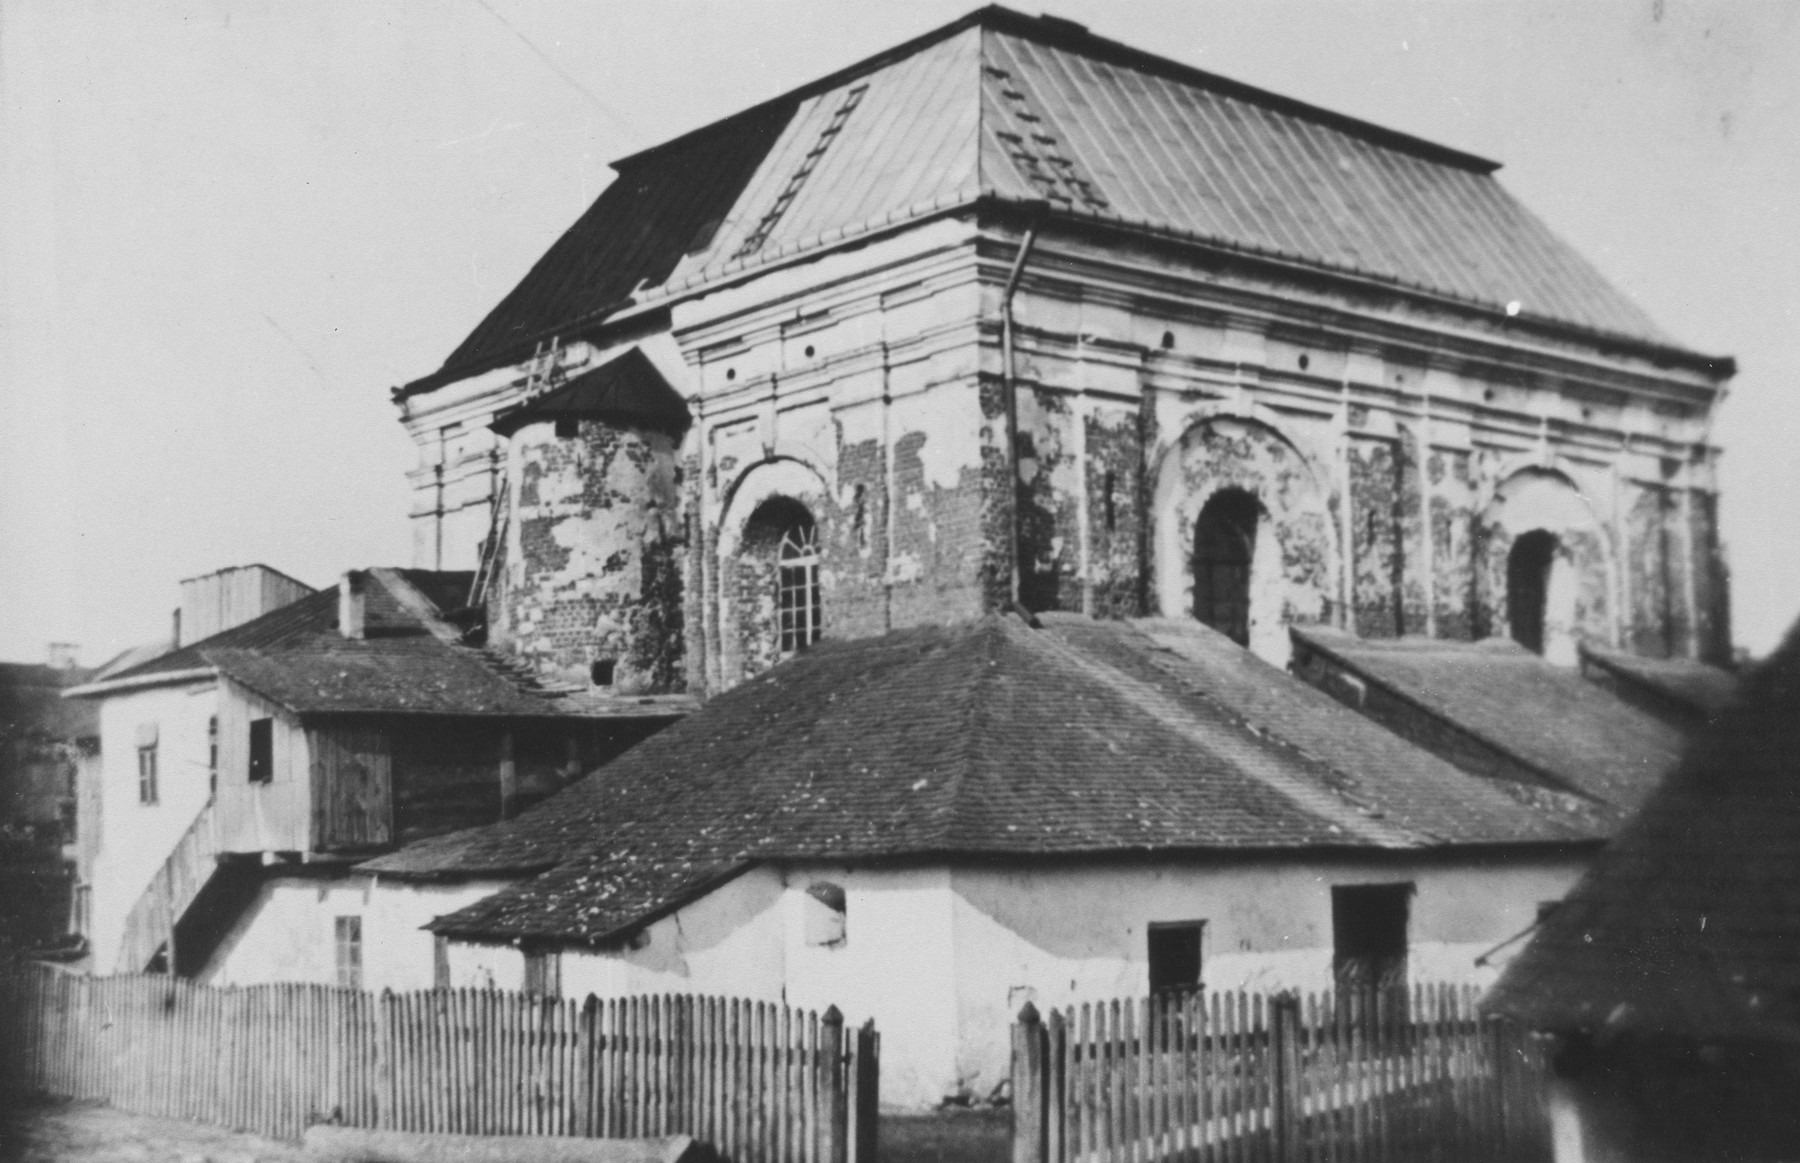 Exterior view of the synagogue in Tomaszow Lubelski.